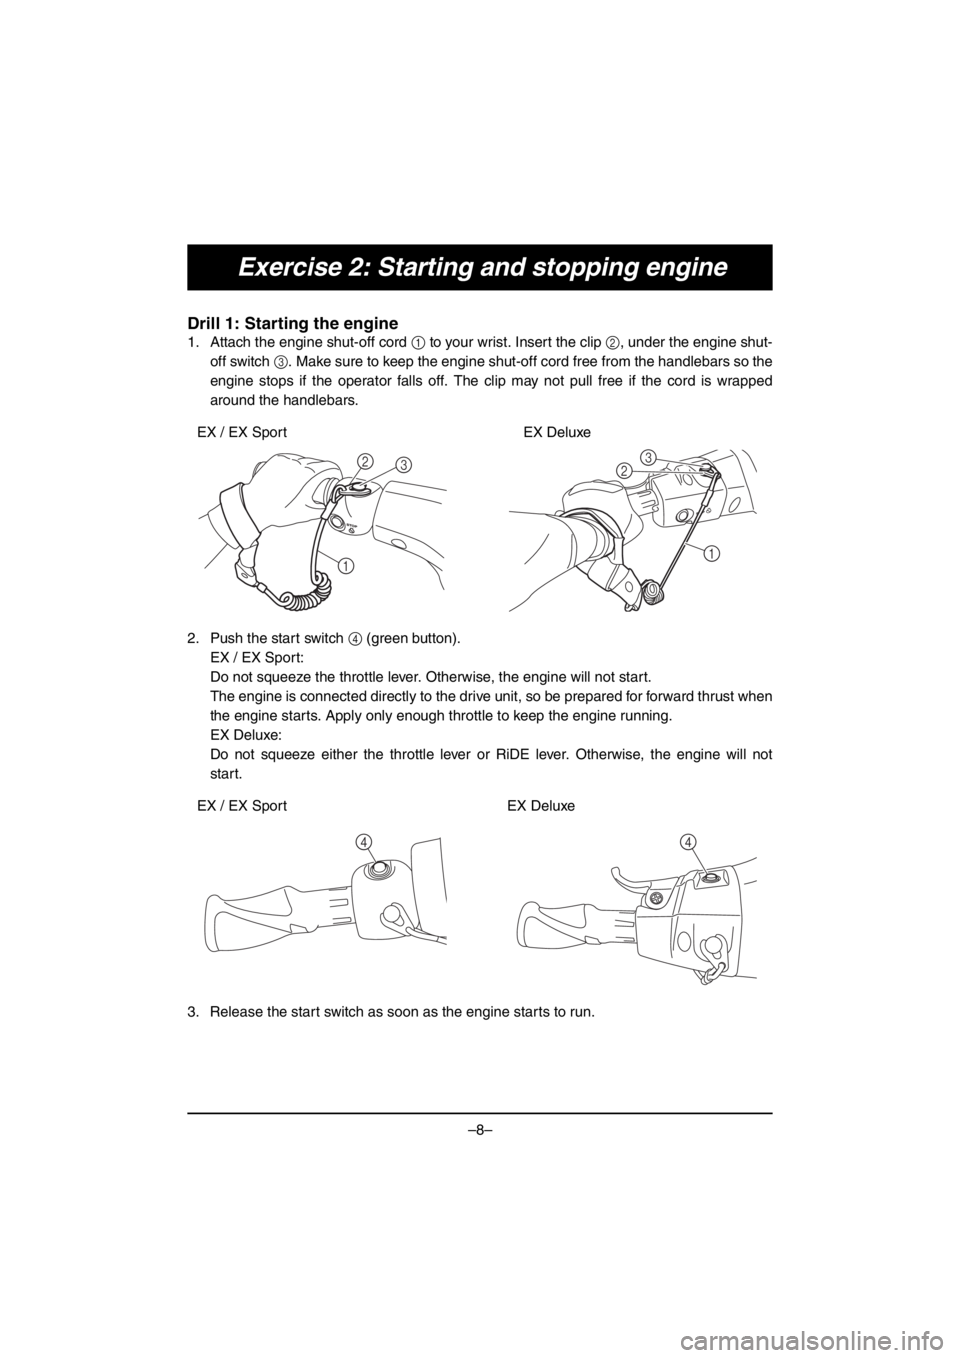 YAMAHA EX 2017  Manual de utilização (in Portuguese) –8–
Exercise 2: Starting and stopping engine
Drill 1: Starting the engine
1. Attach the engine shut-off cord 1 to your wrist. Insert the clip 2, under the engine shut-
off switch 3. Make sure to k